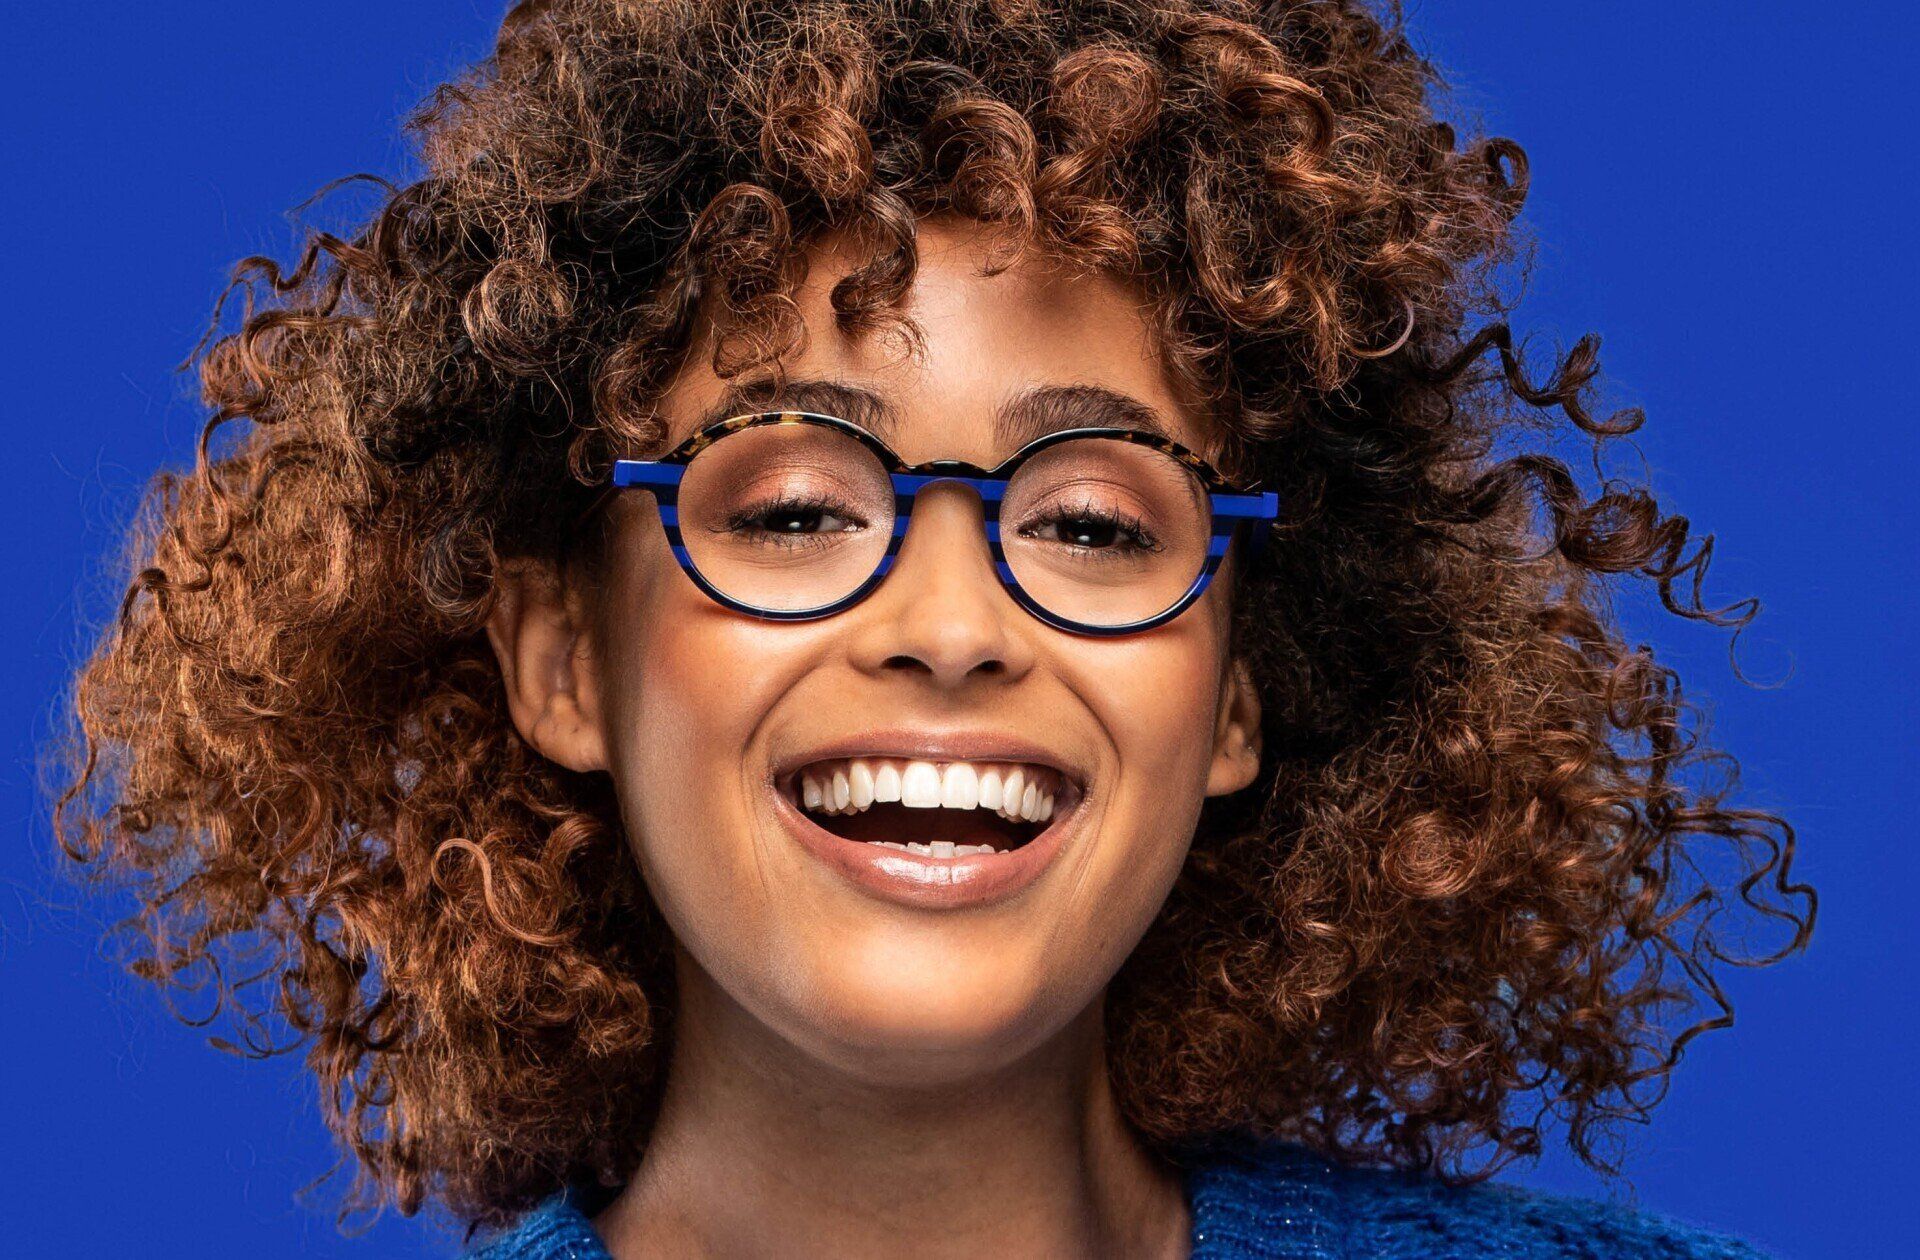 person smiling wearing glasses